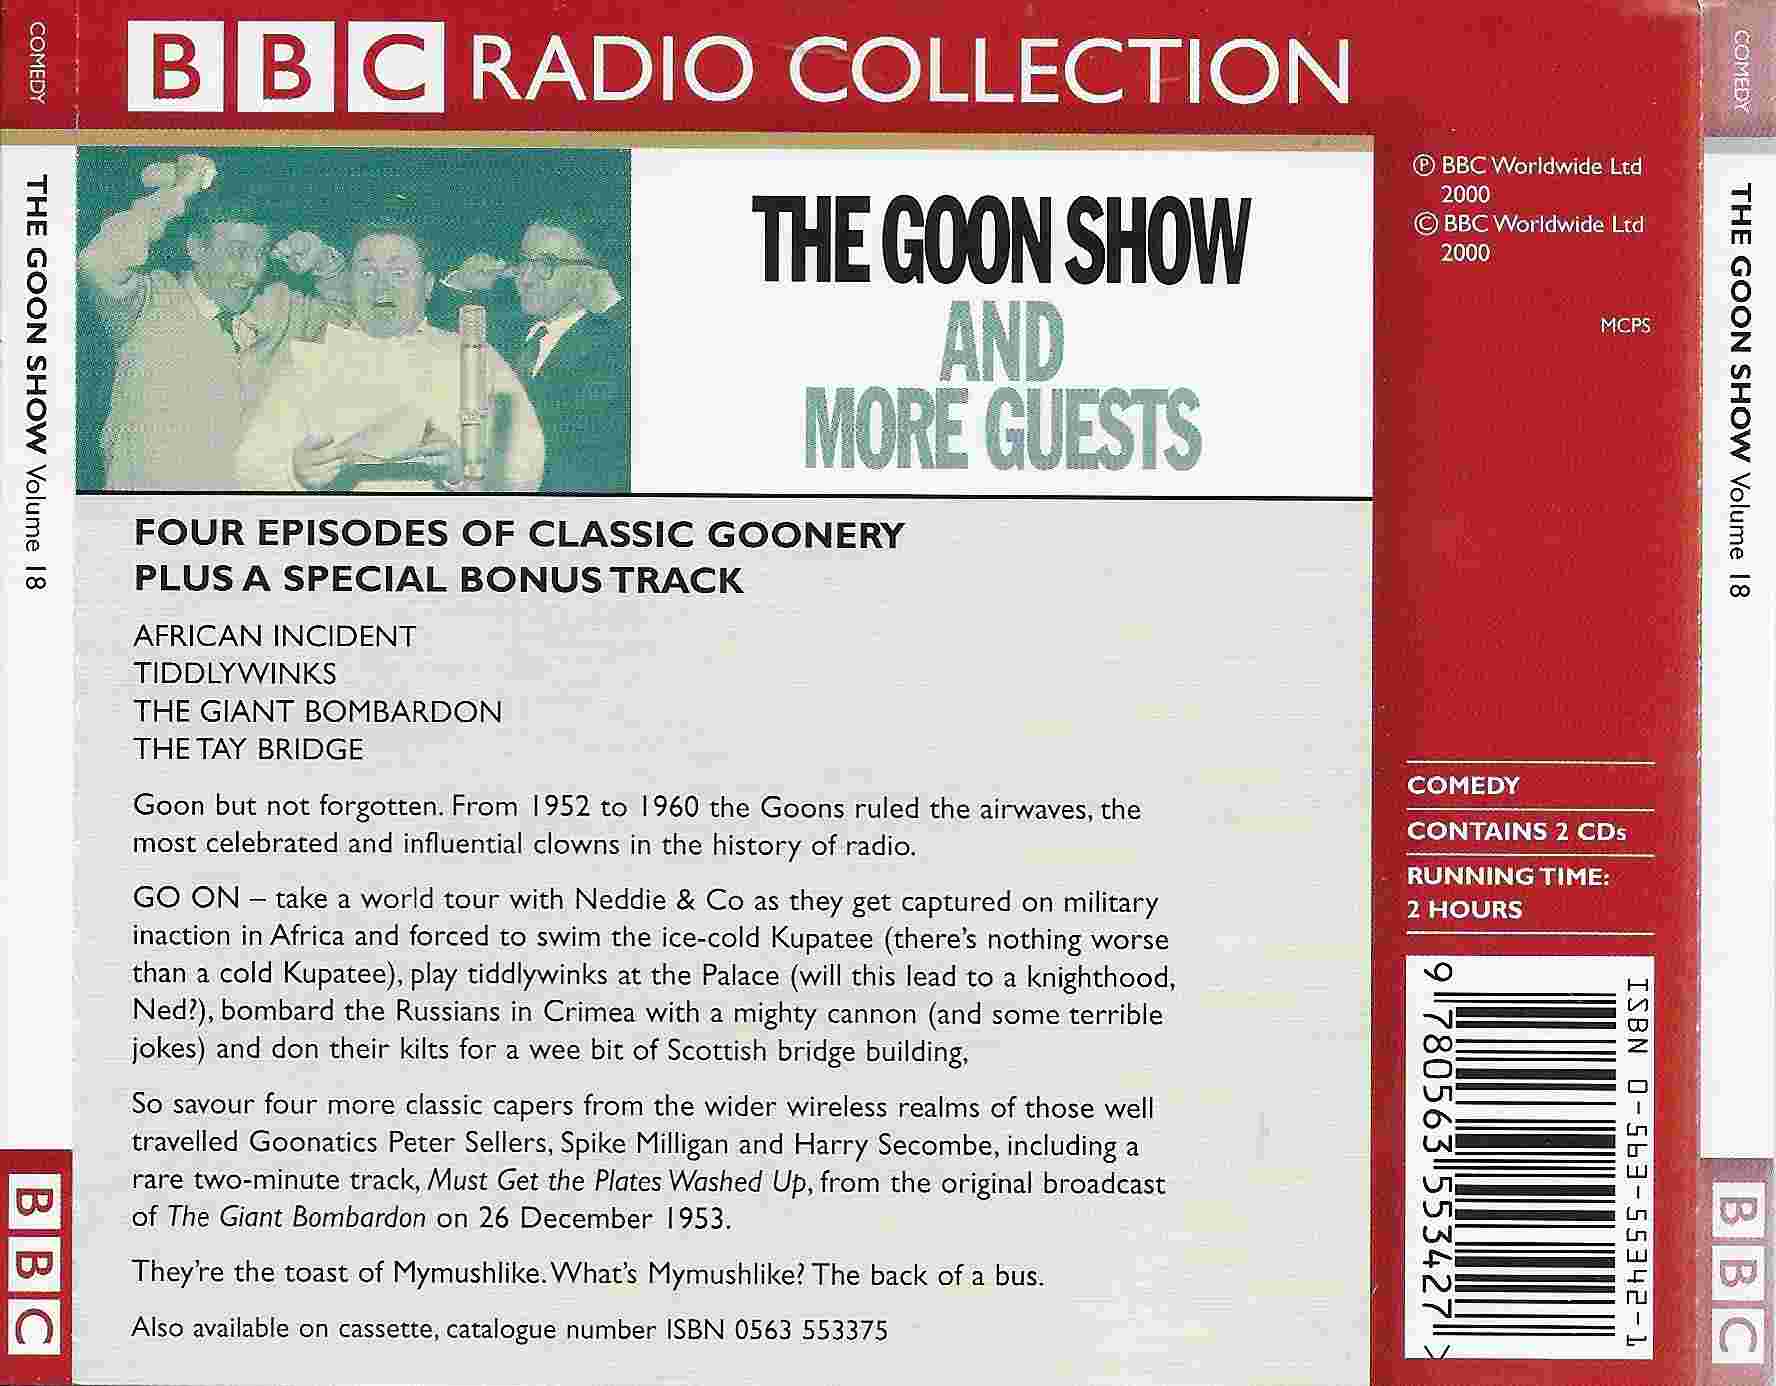 Picture of ISBN 0-563-55342-1 The Goon show 18 and more guests by artist Spike Milligan / Larry Stephens from the BBC records and Tapes library